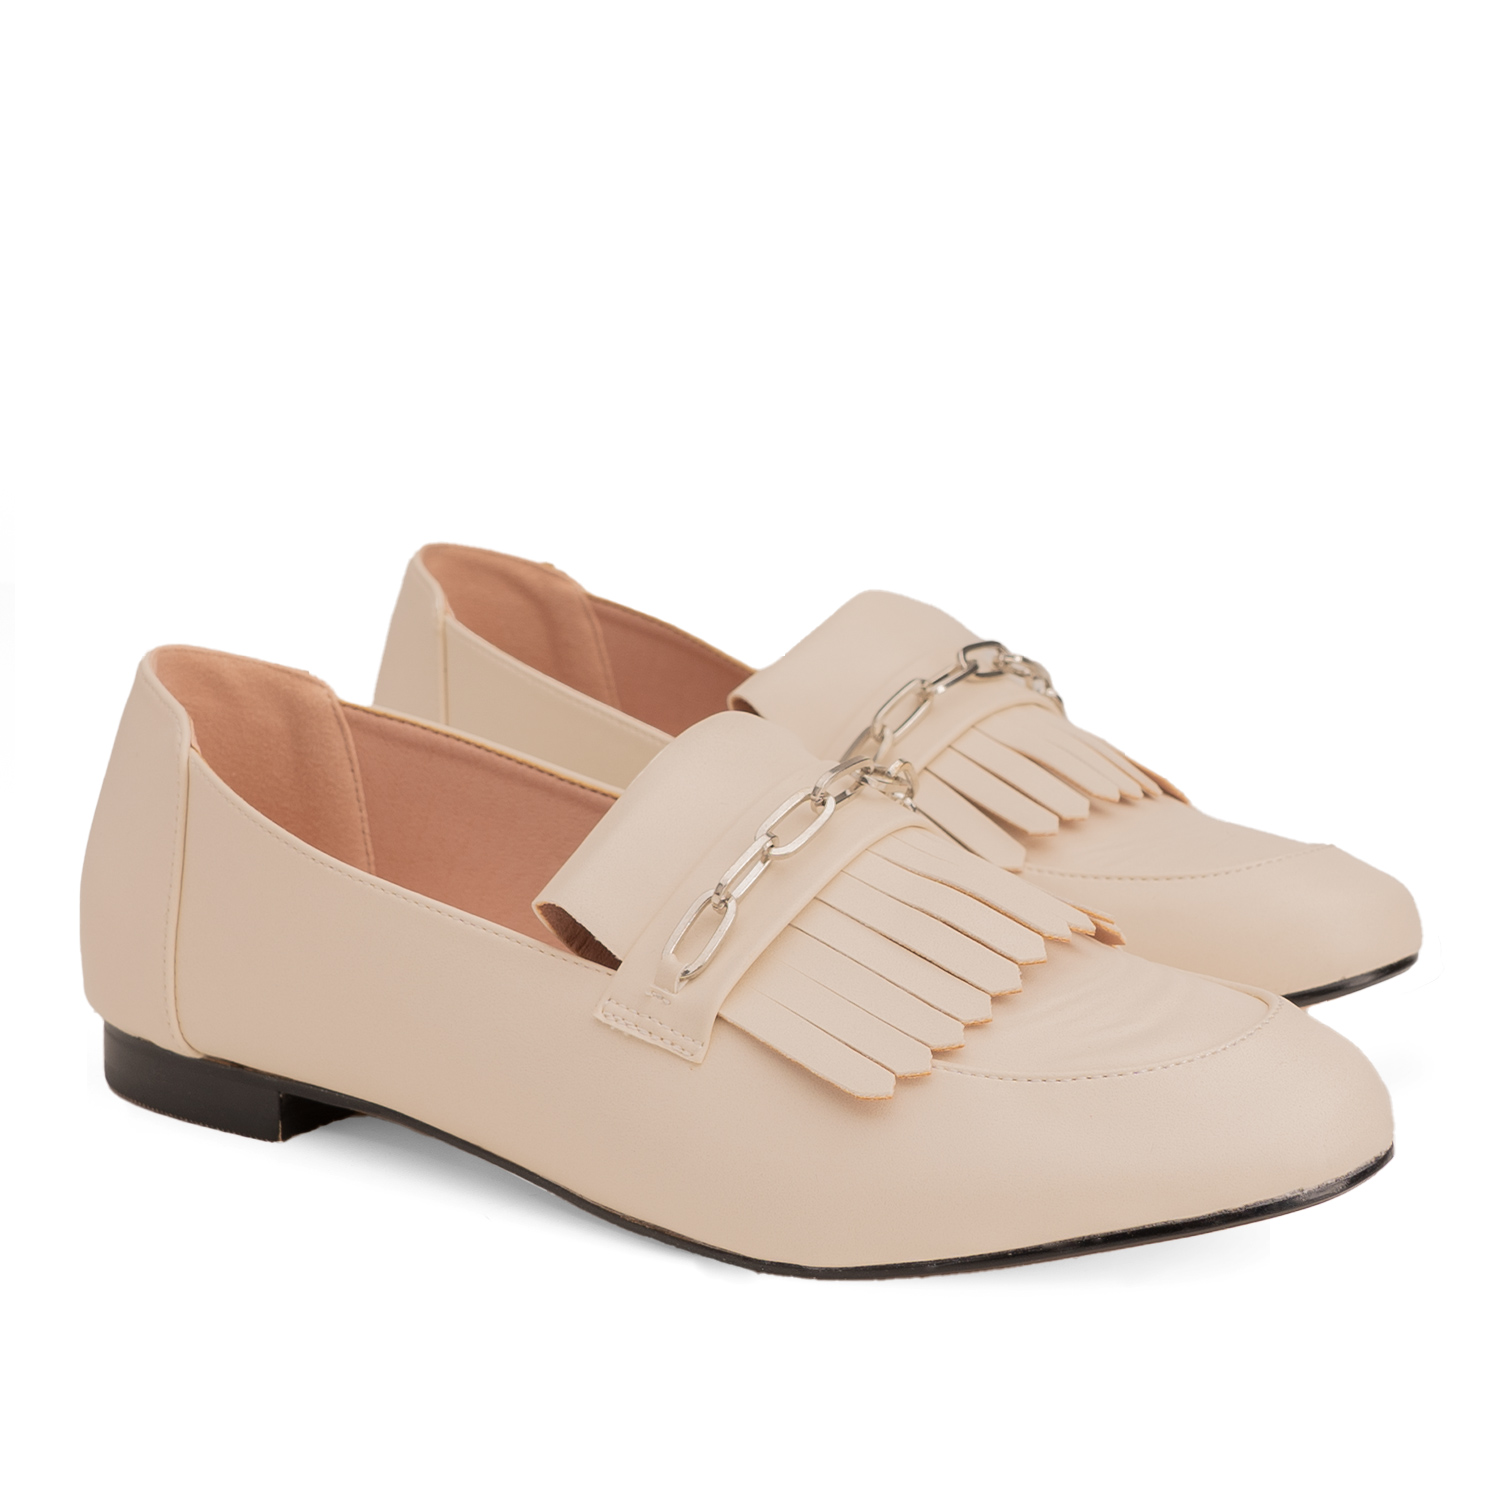 Moccasins in ivory faux leather and fringe 